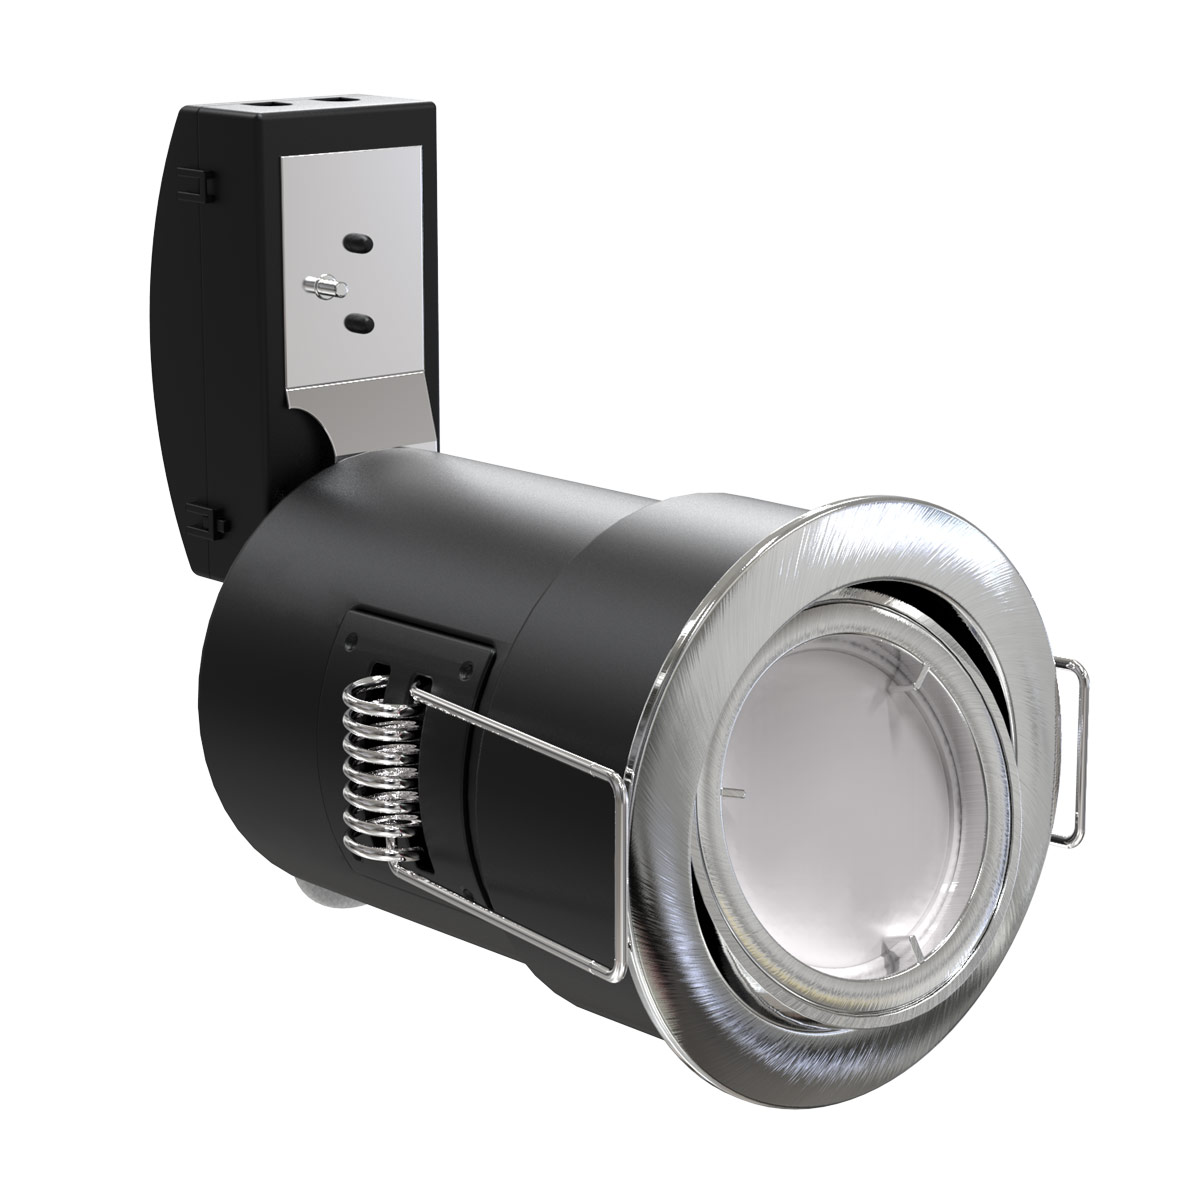 View Chrome Adjustable GU10 FireRated Downlight information